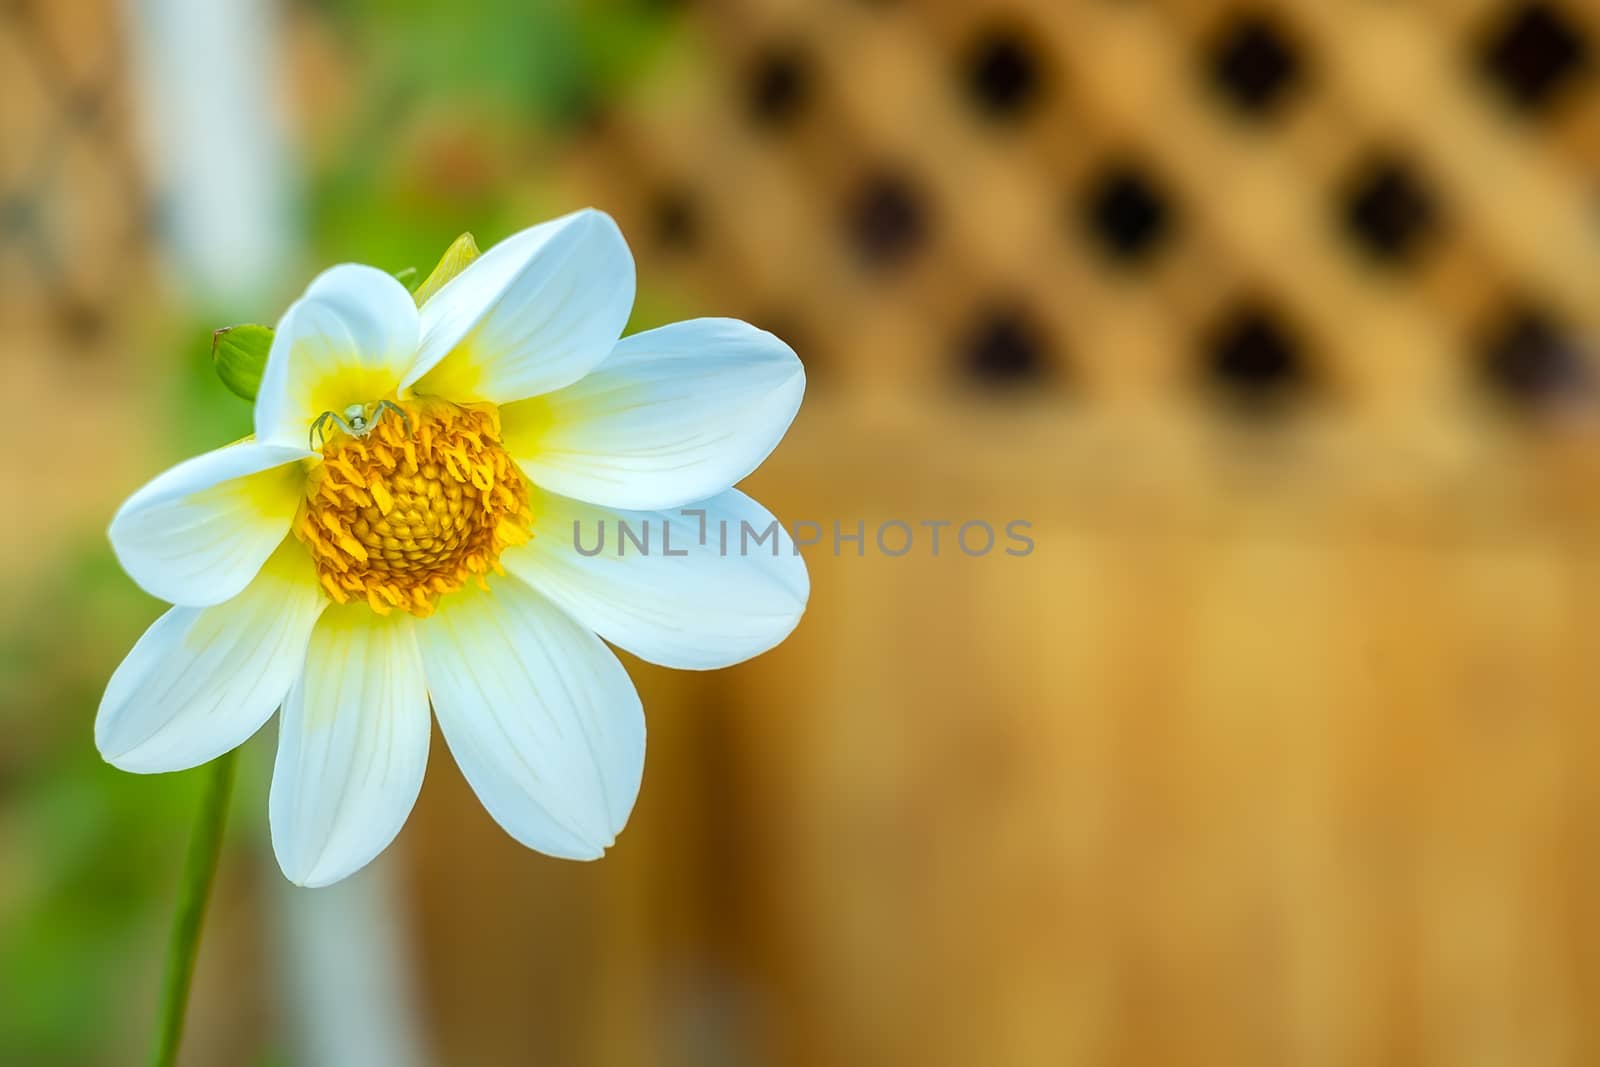 flower Dahlia Bambino with white petals and a green spider by jk3030